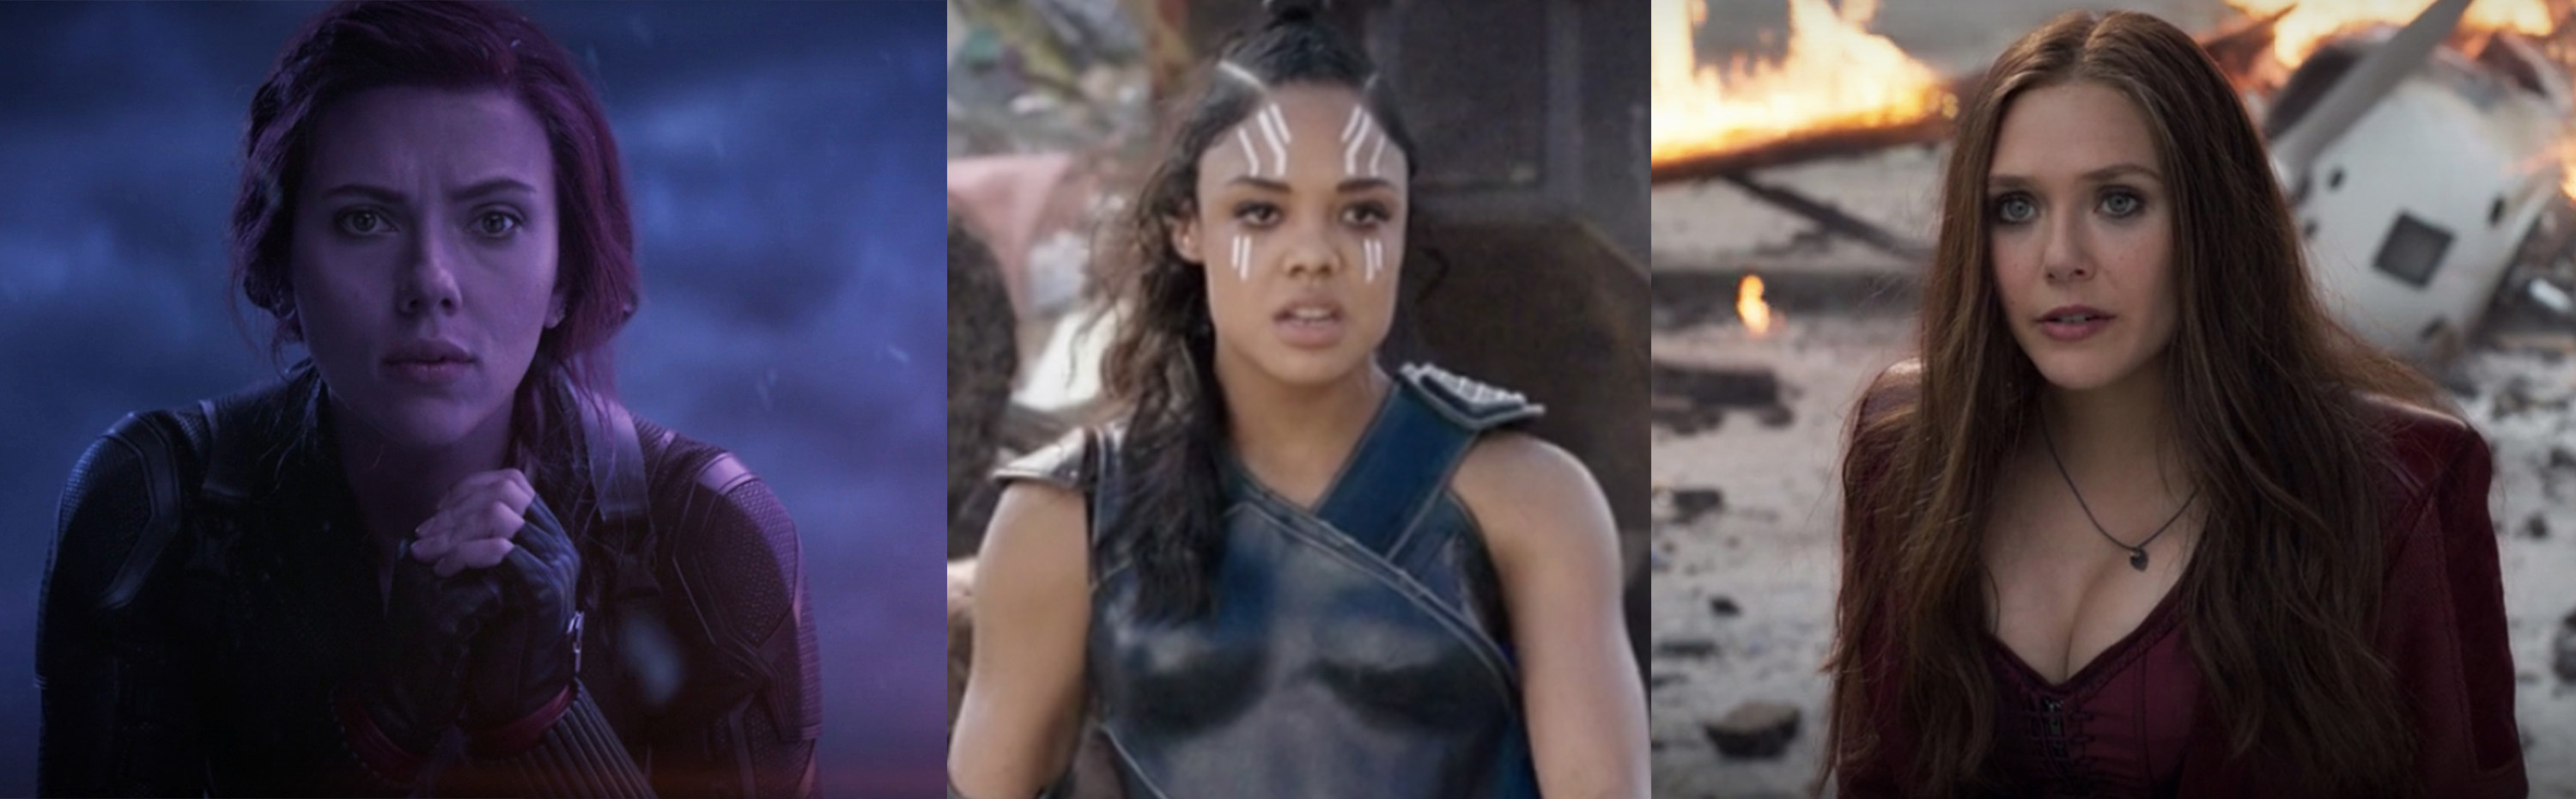 Black Widow and Valkyrie&#x27;s necklines are significantly higher